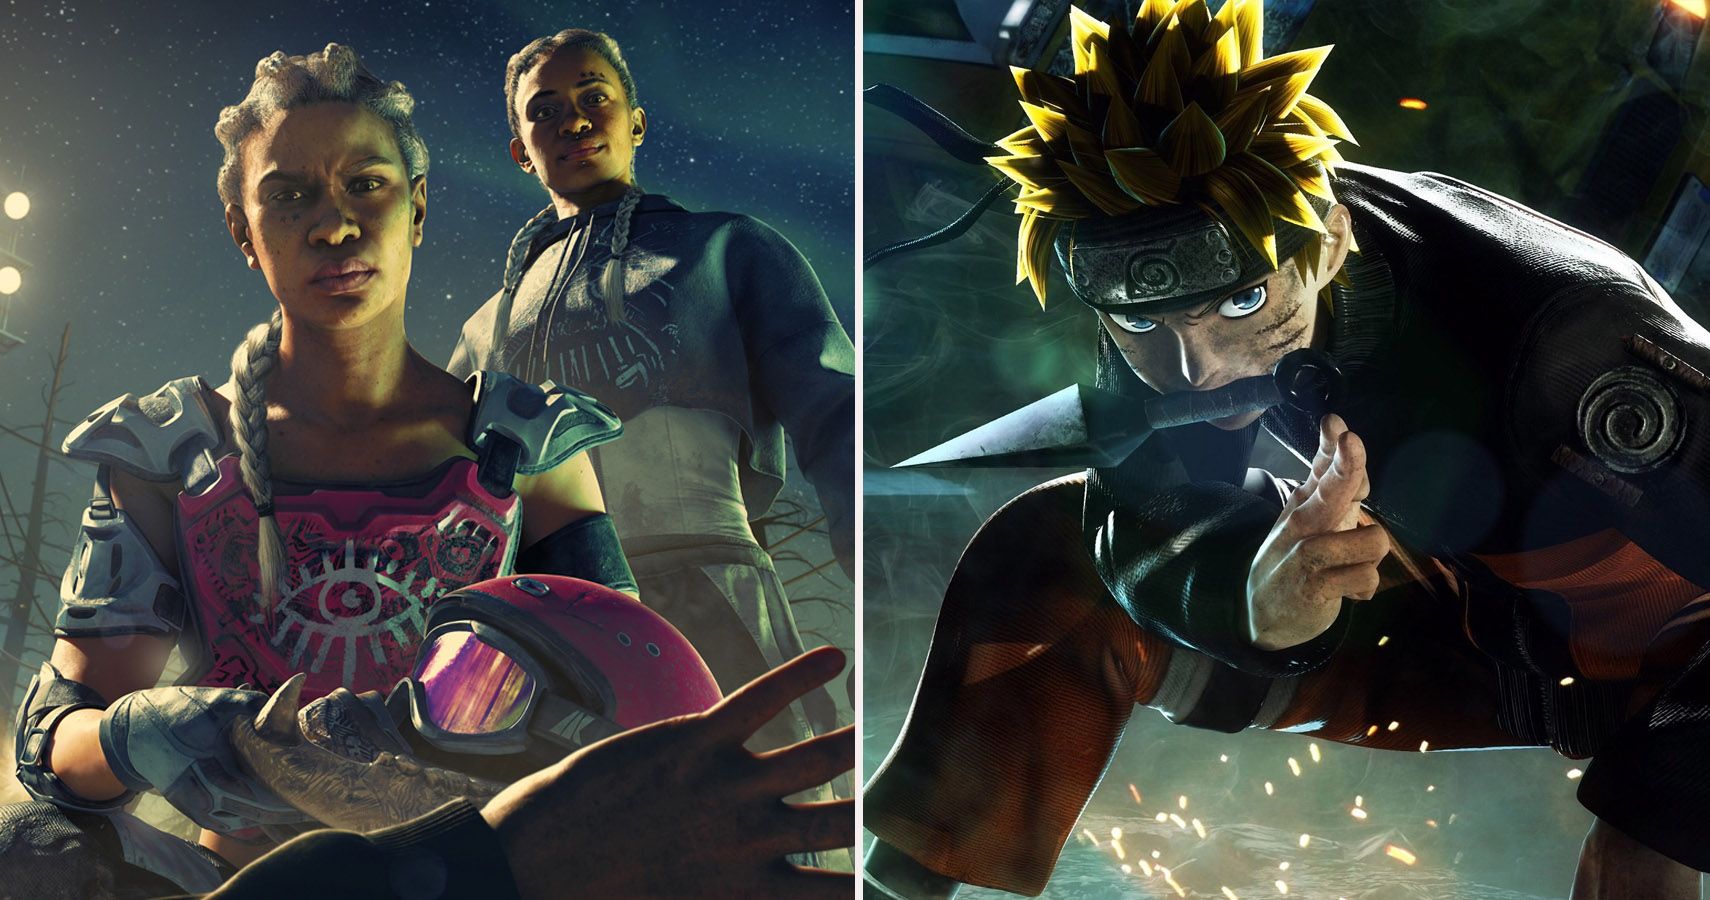 The 10 Best Naruto Games, According To Metacritic